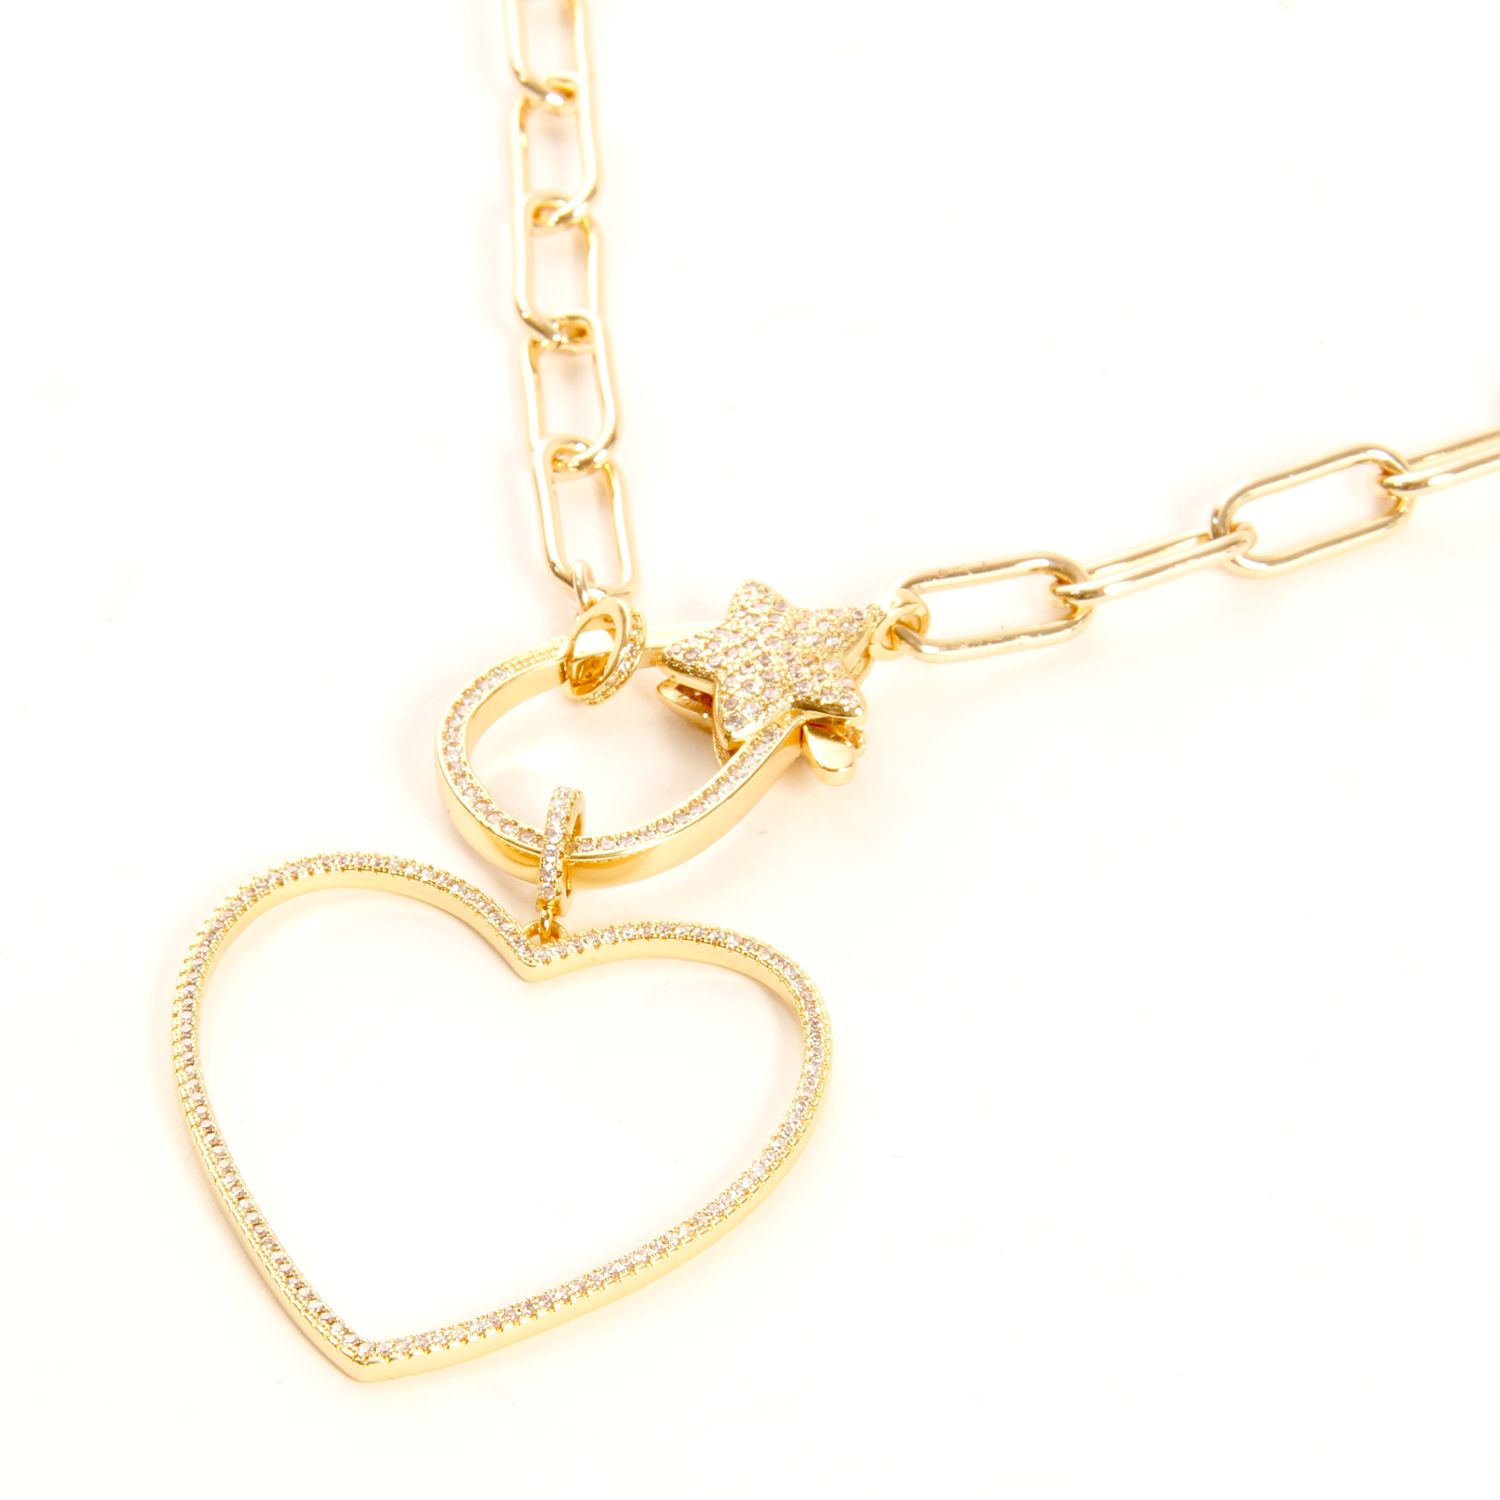 Valentine Rouge Jewellery: Open Heart Gold Necklace Product Image 2 of 3